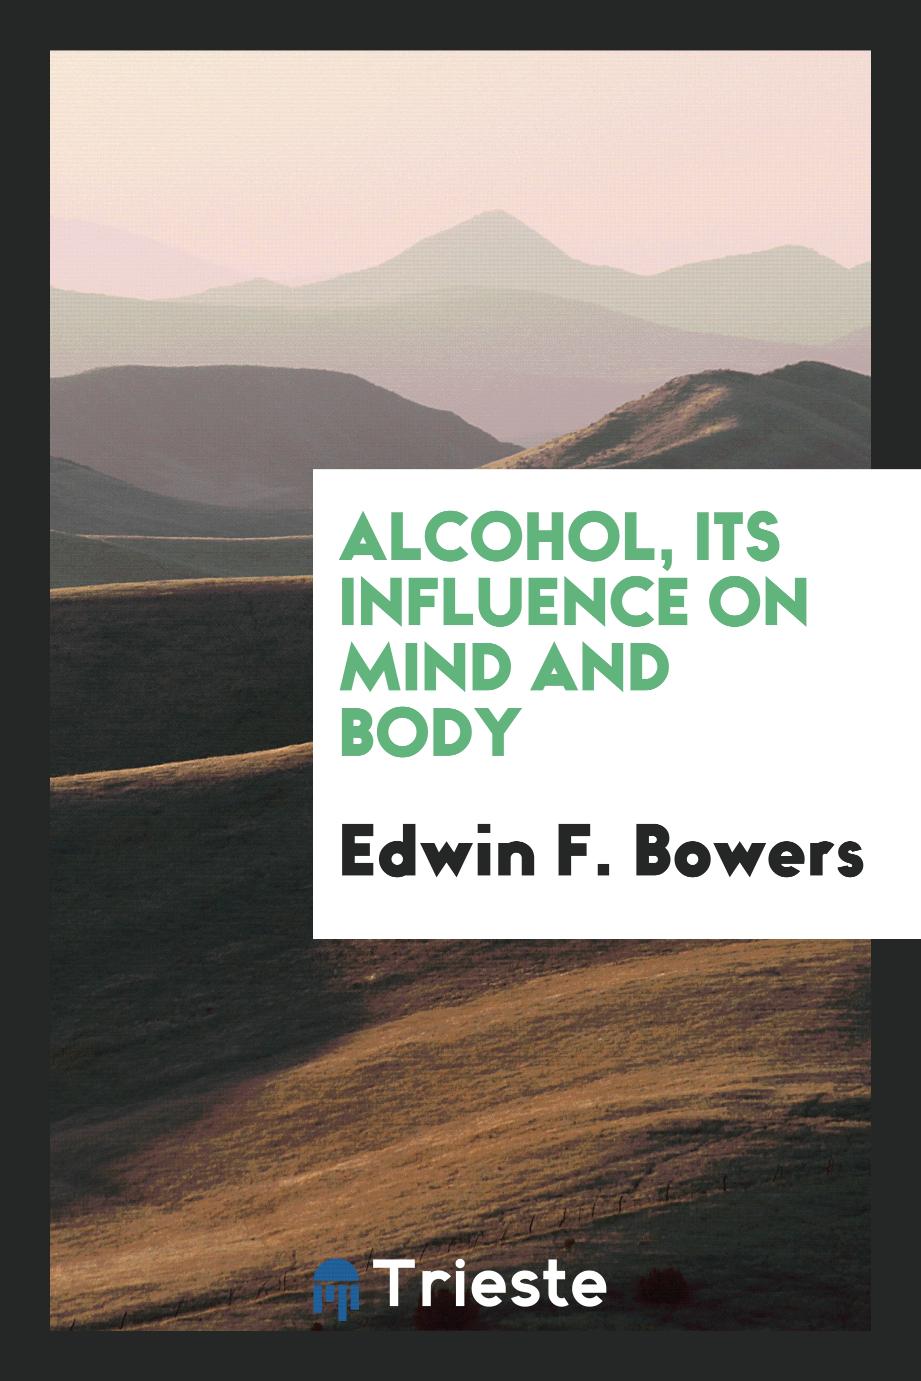 Alcohol, its influence on mind and body